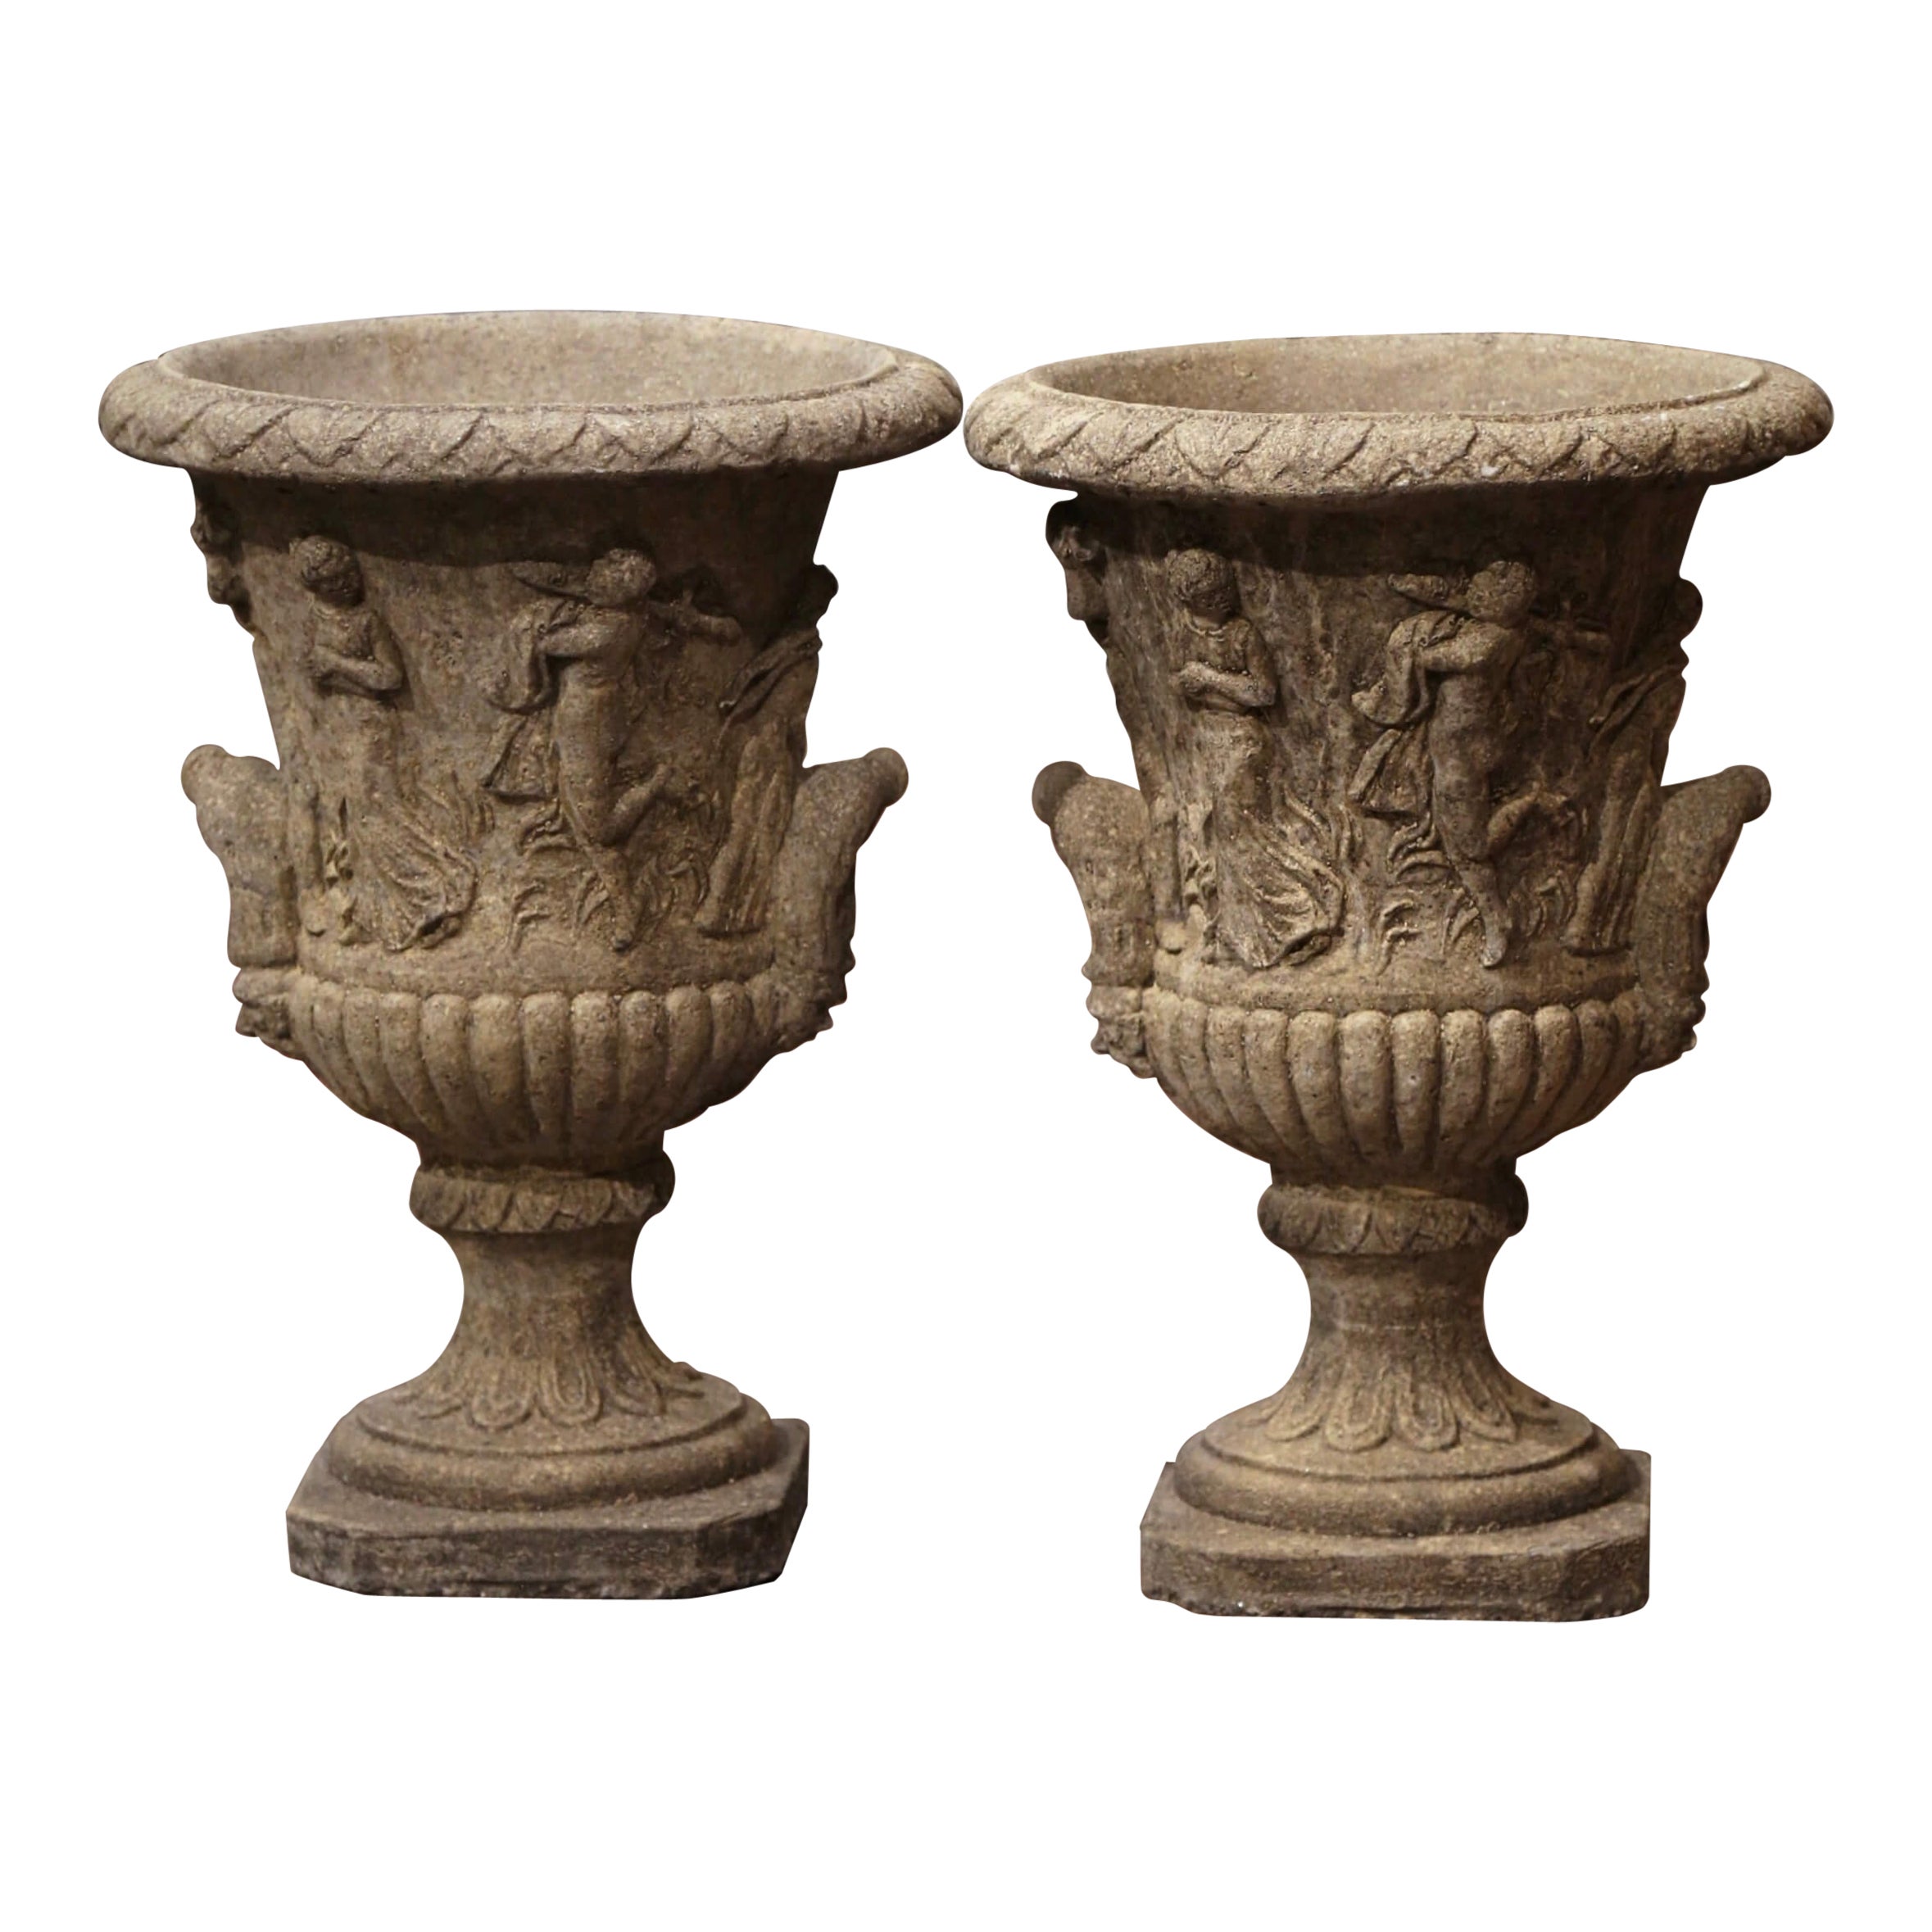 Pair of Vintage French Hand Carved Stone Campana-Form Outdoor Garden Urns For Sale